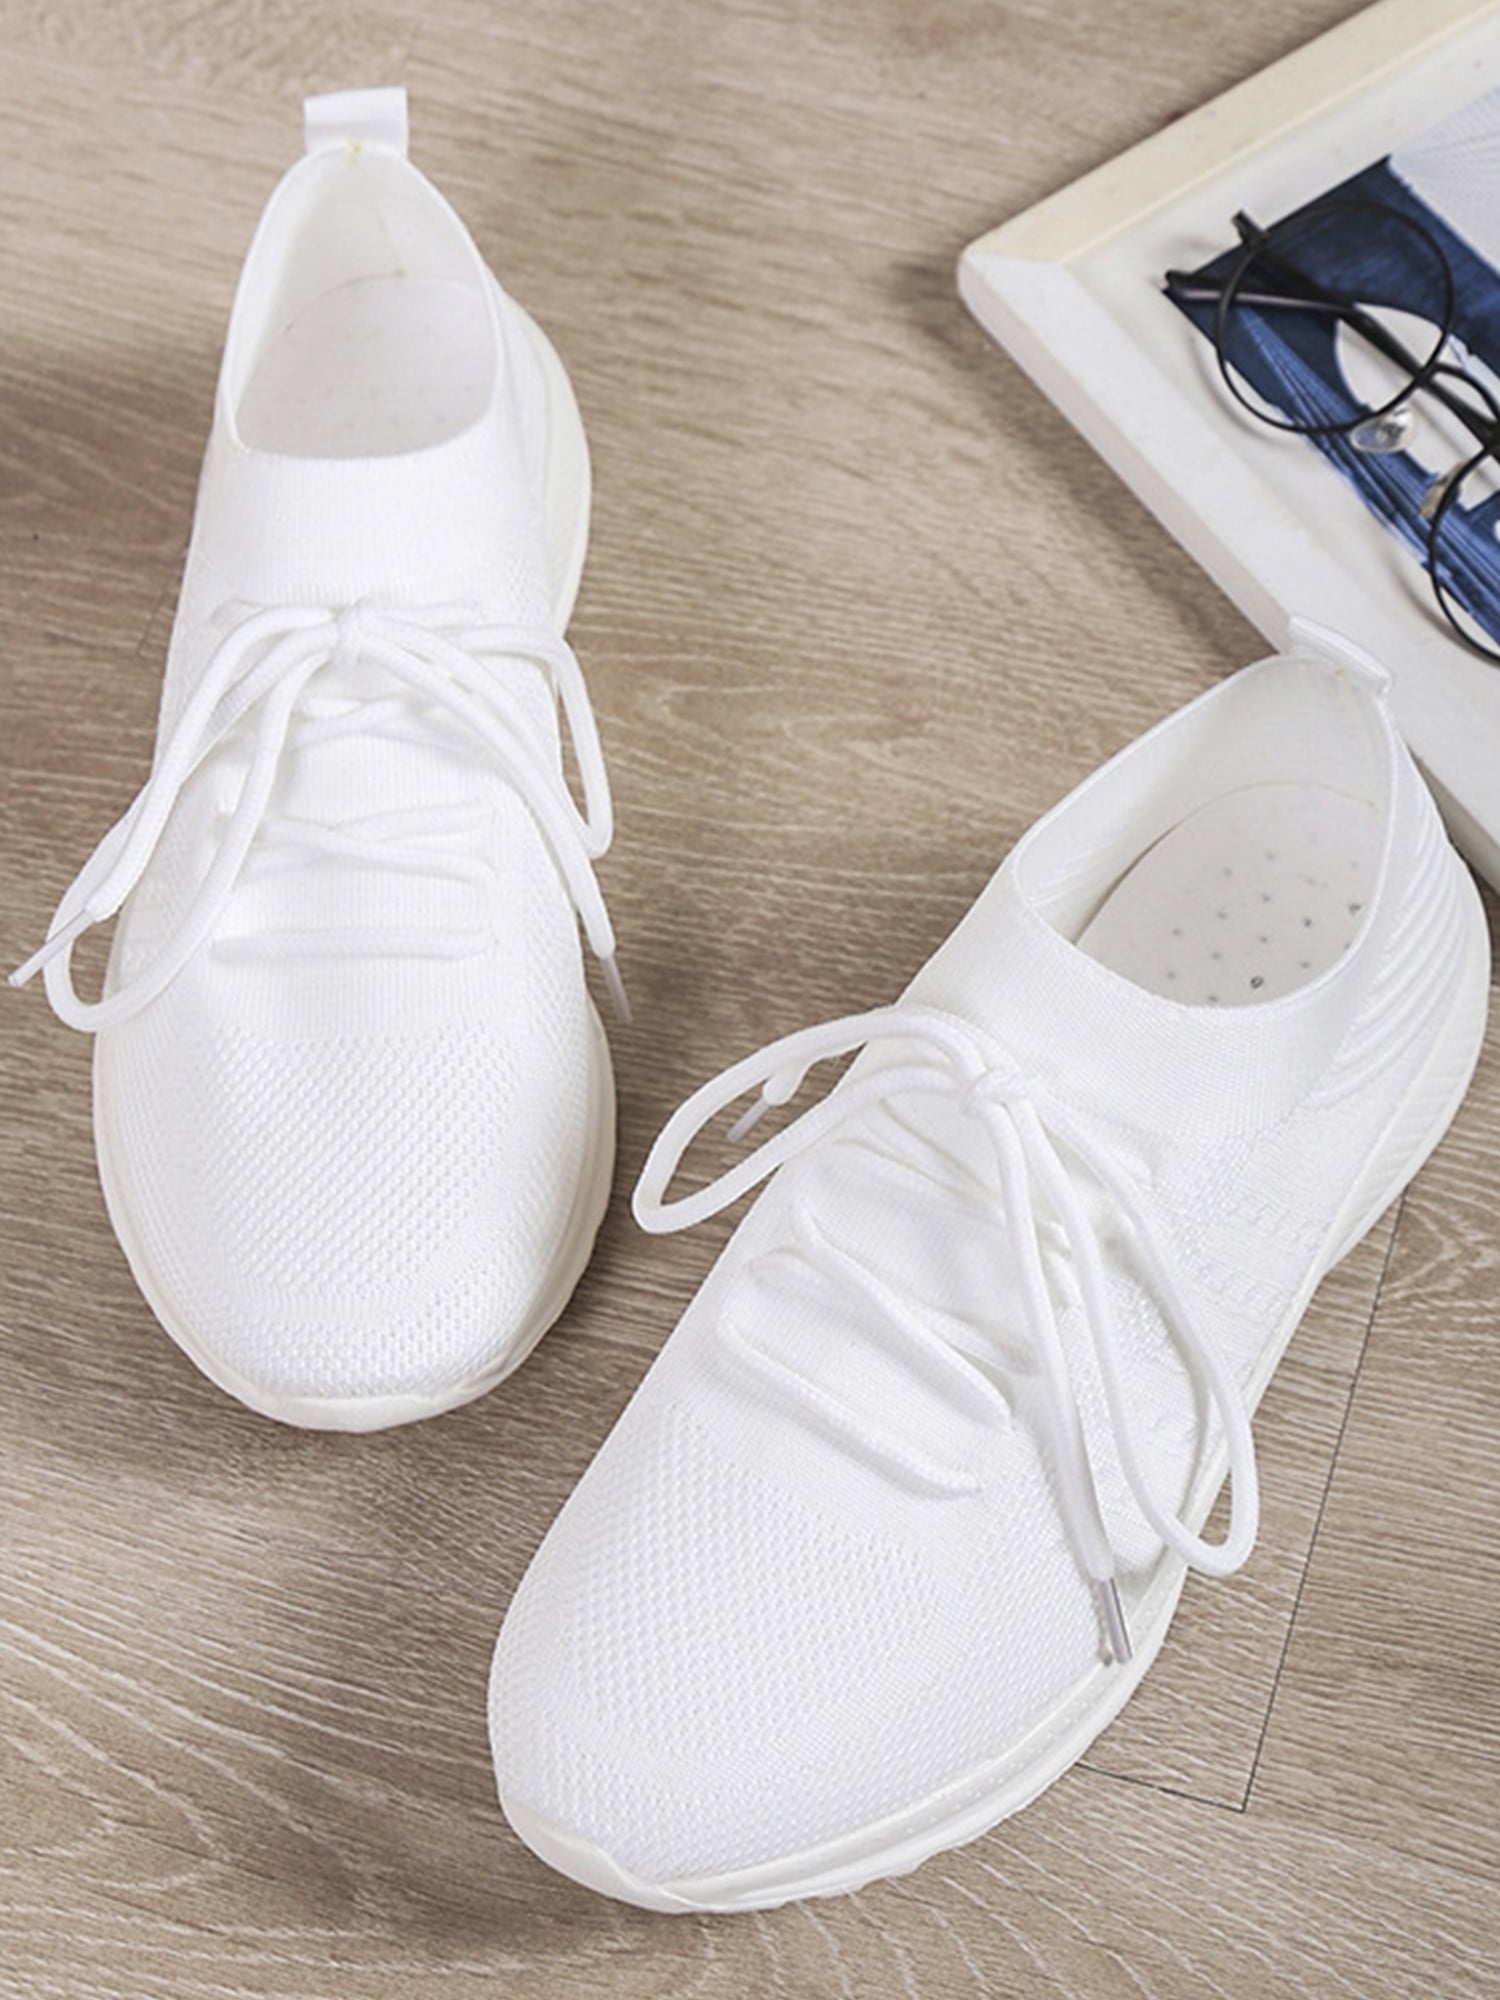 Mens White Sneakers: High Quality Comfortable Dress Shoes For Casual  Walking, Running & Outdoor Sports From Mu08, $14.57 | DHgate.Com